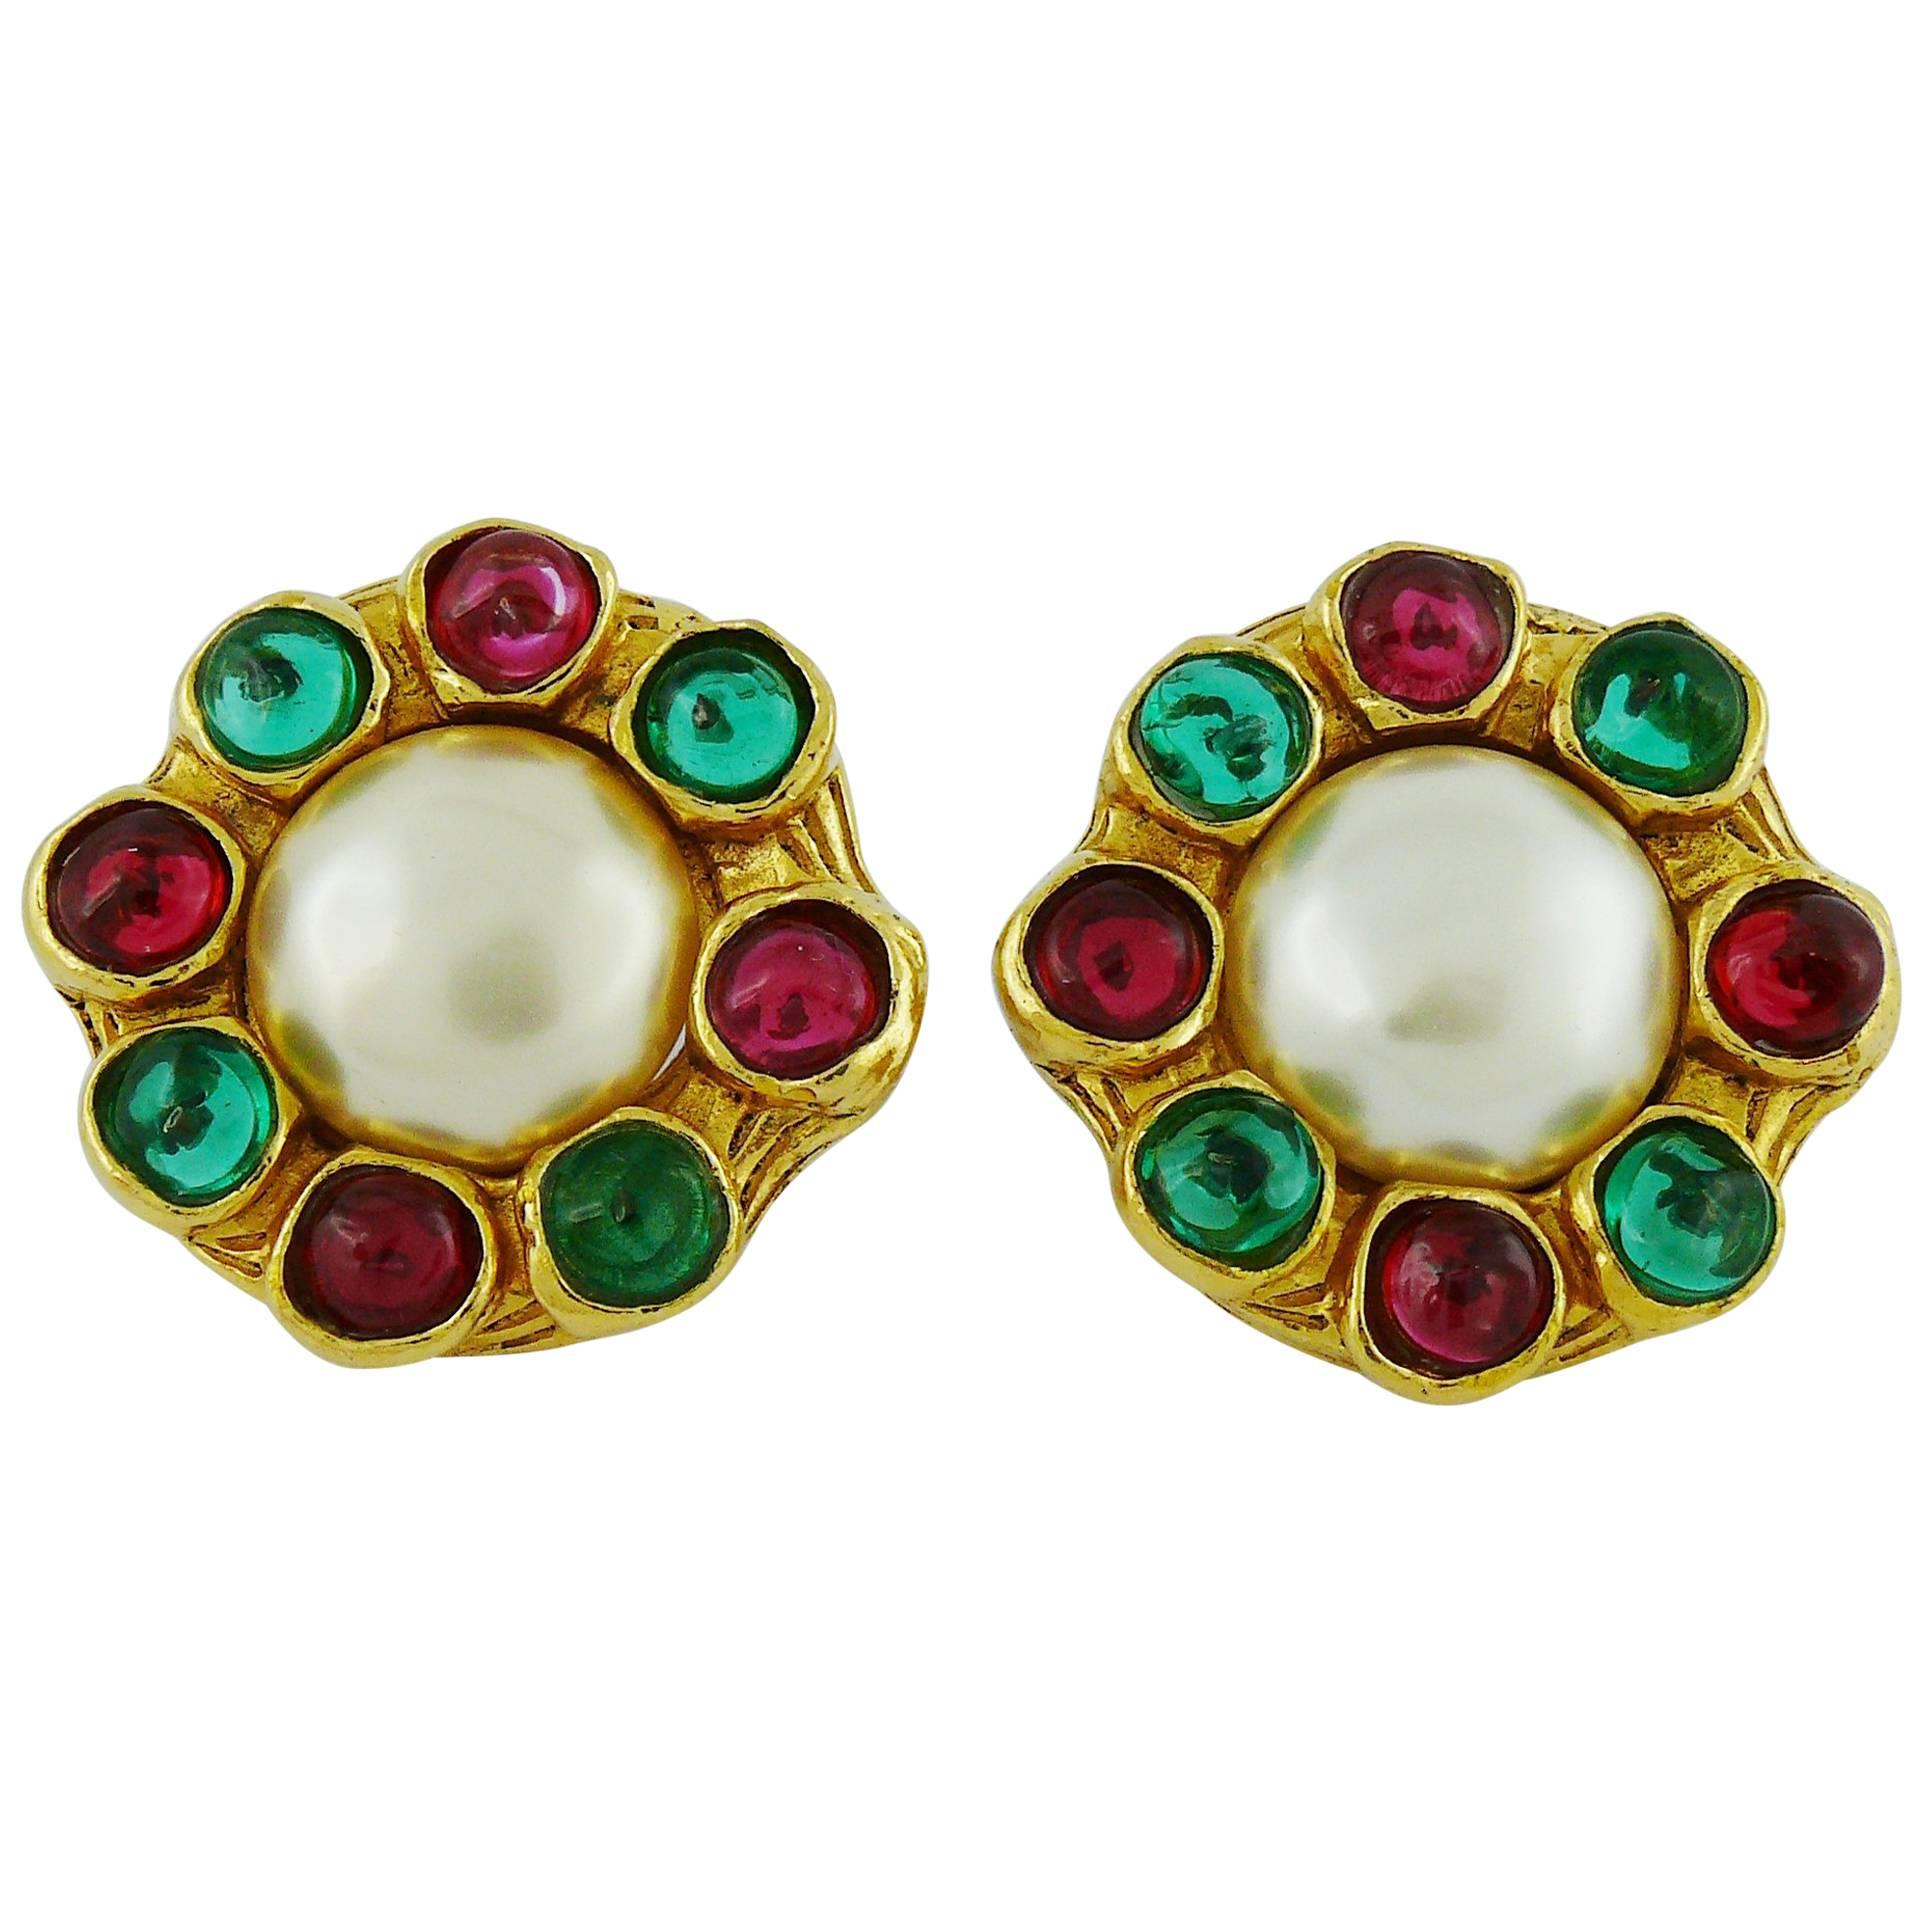 Chanel Vintage Gripoix Multicolor Glass Cabochons and Faux Pearl Earrings